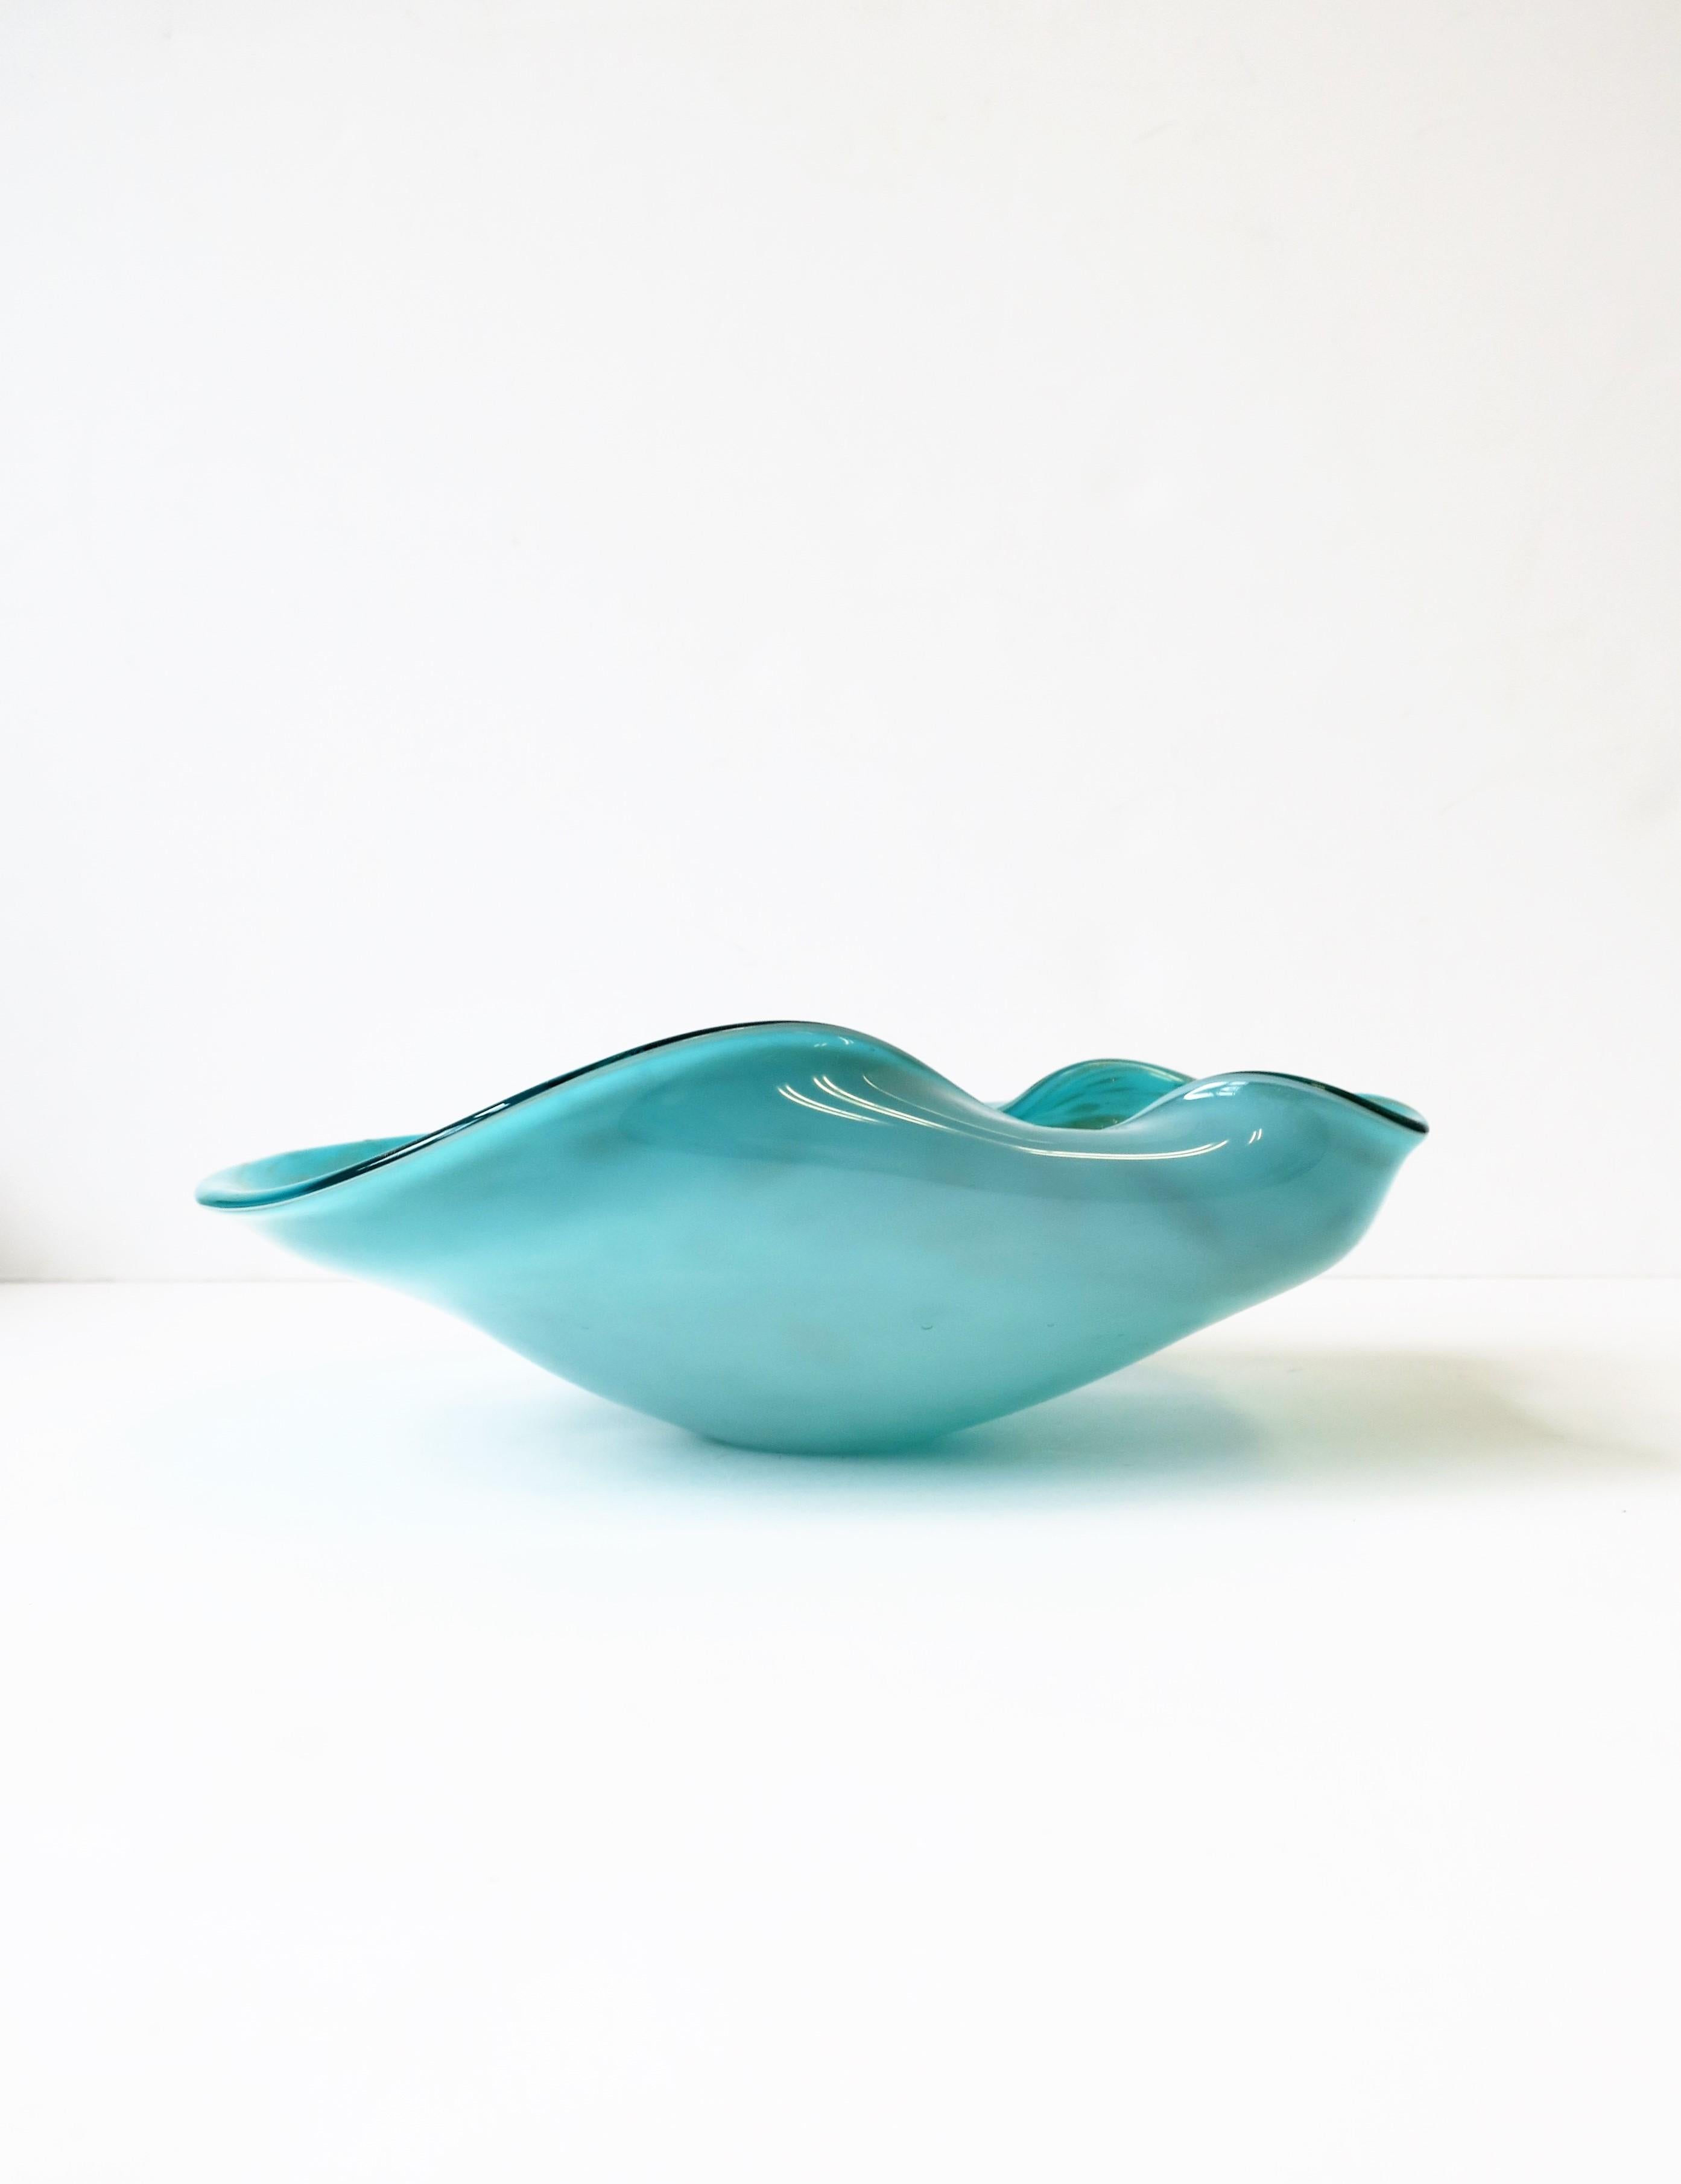 Italian Murano Art Glass Bowl in Turquoise Blue In Good Condition For Sale In New York, NY